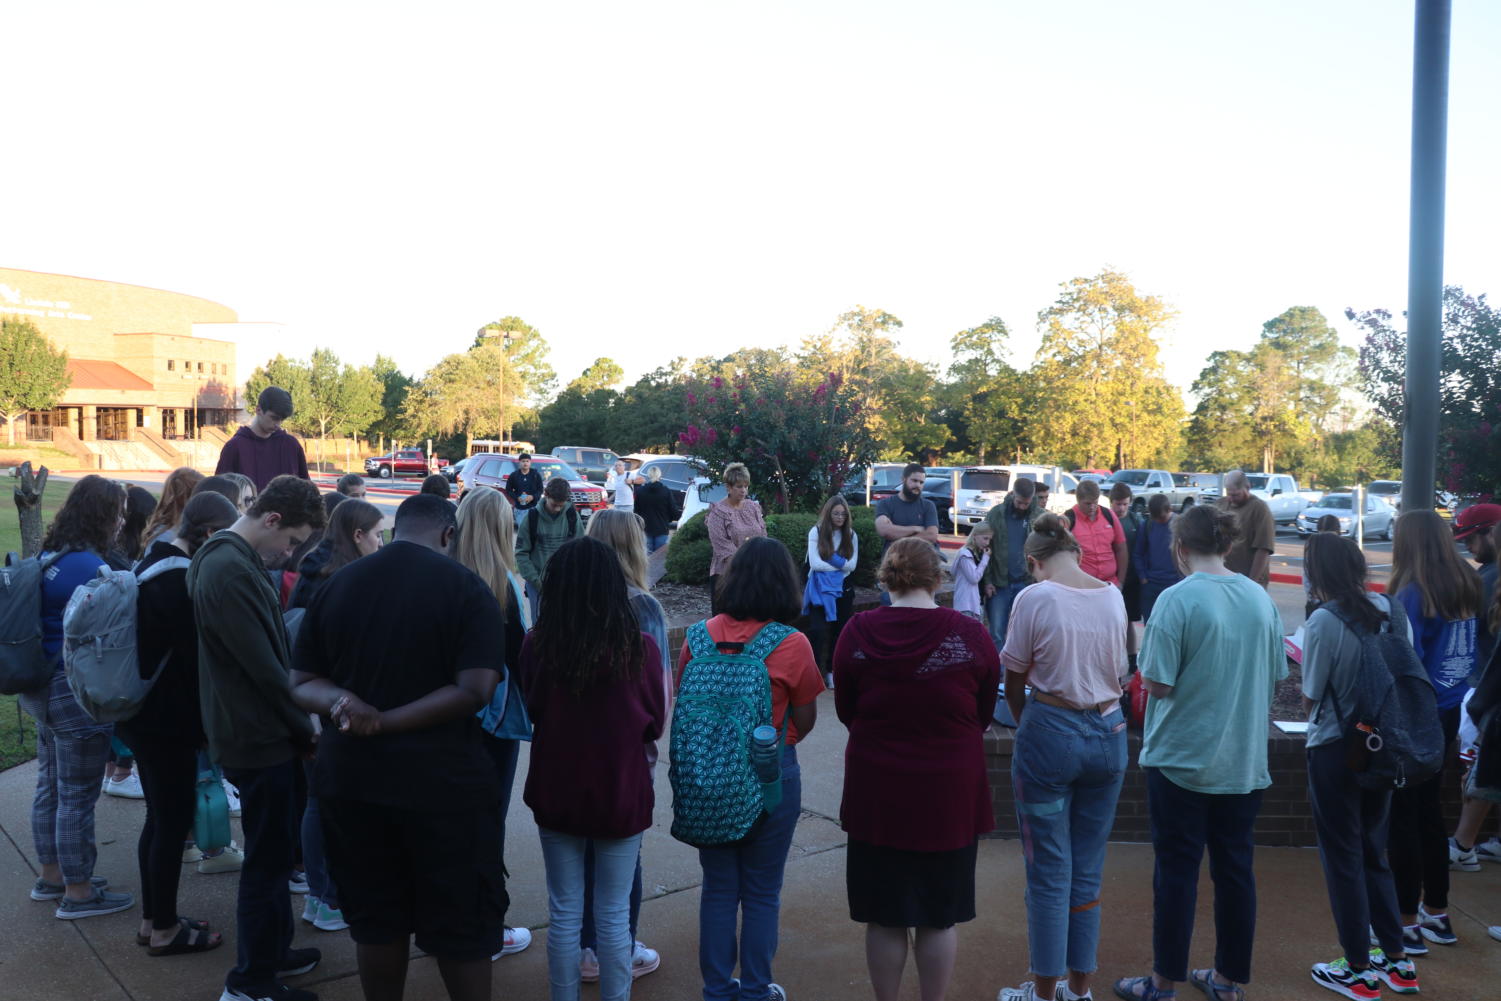 Students gather around the flag pole to pray for the community.